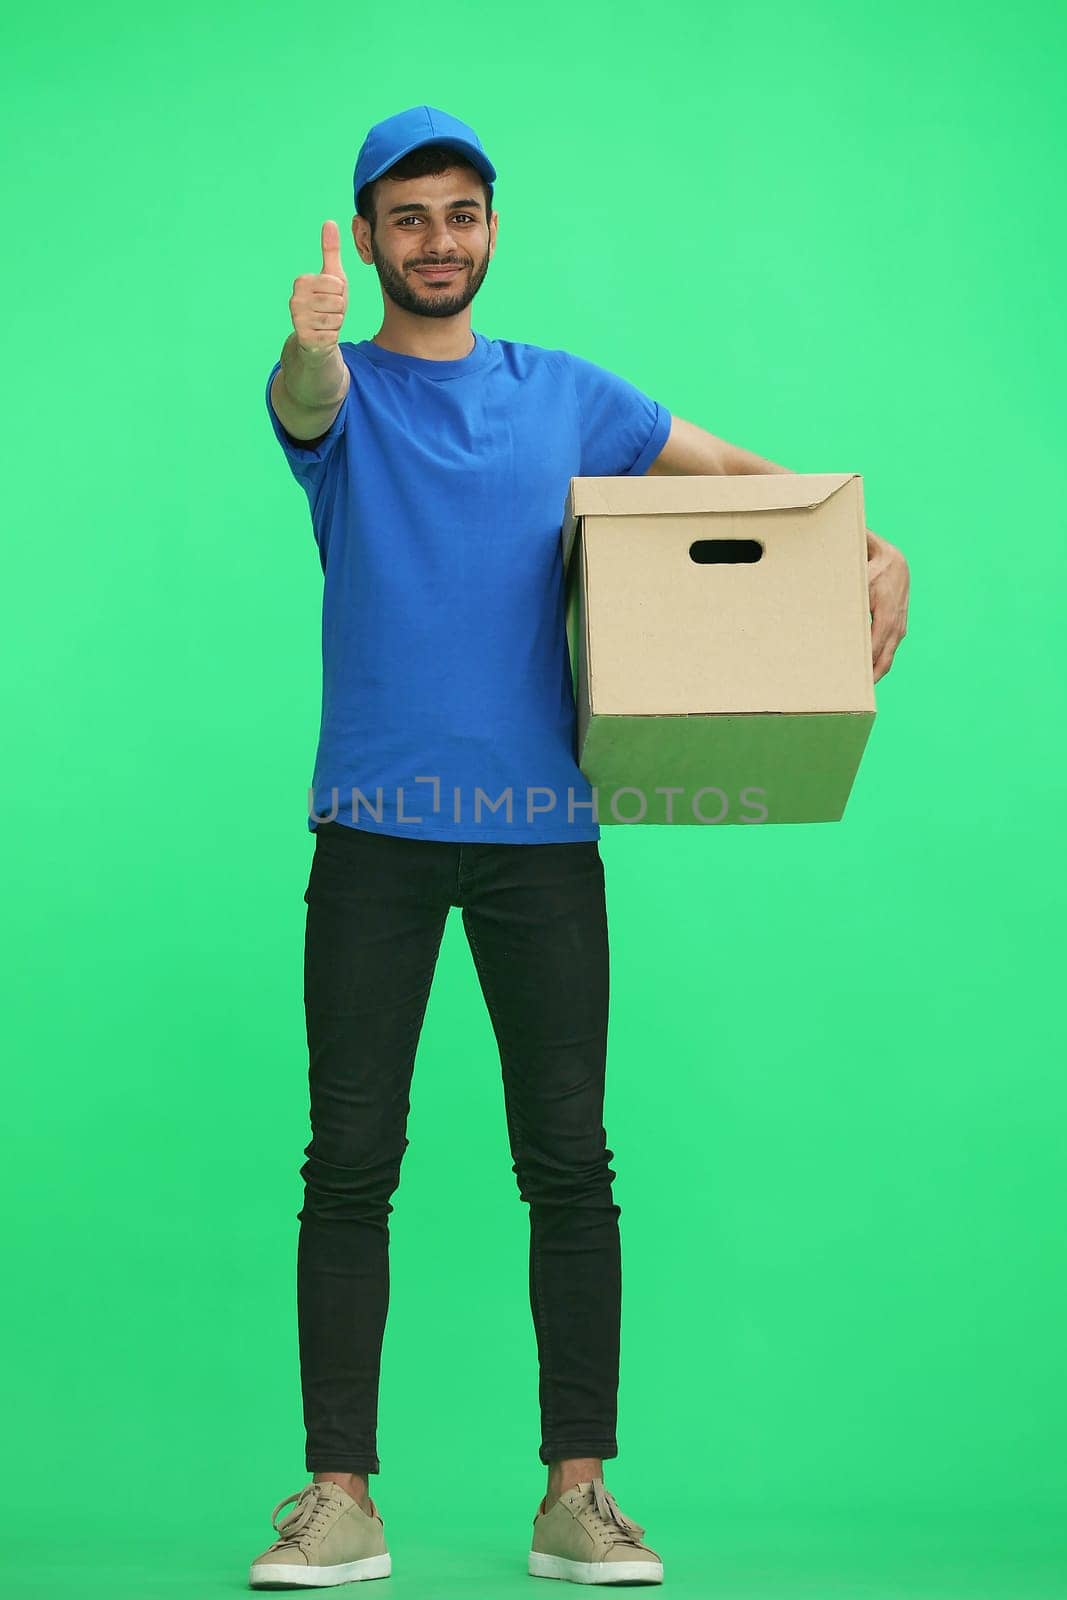 A man on a green background with box. Shows thumbs up sign.